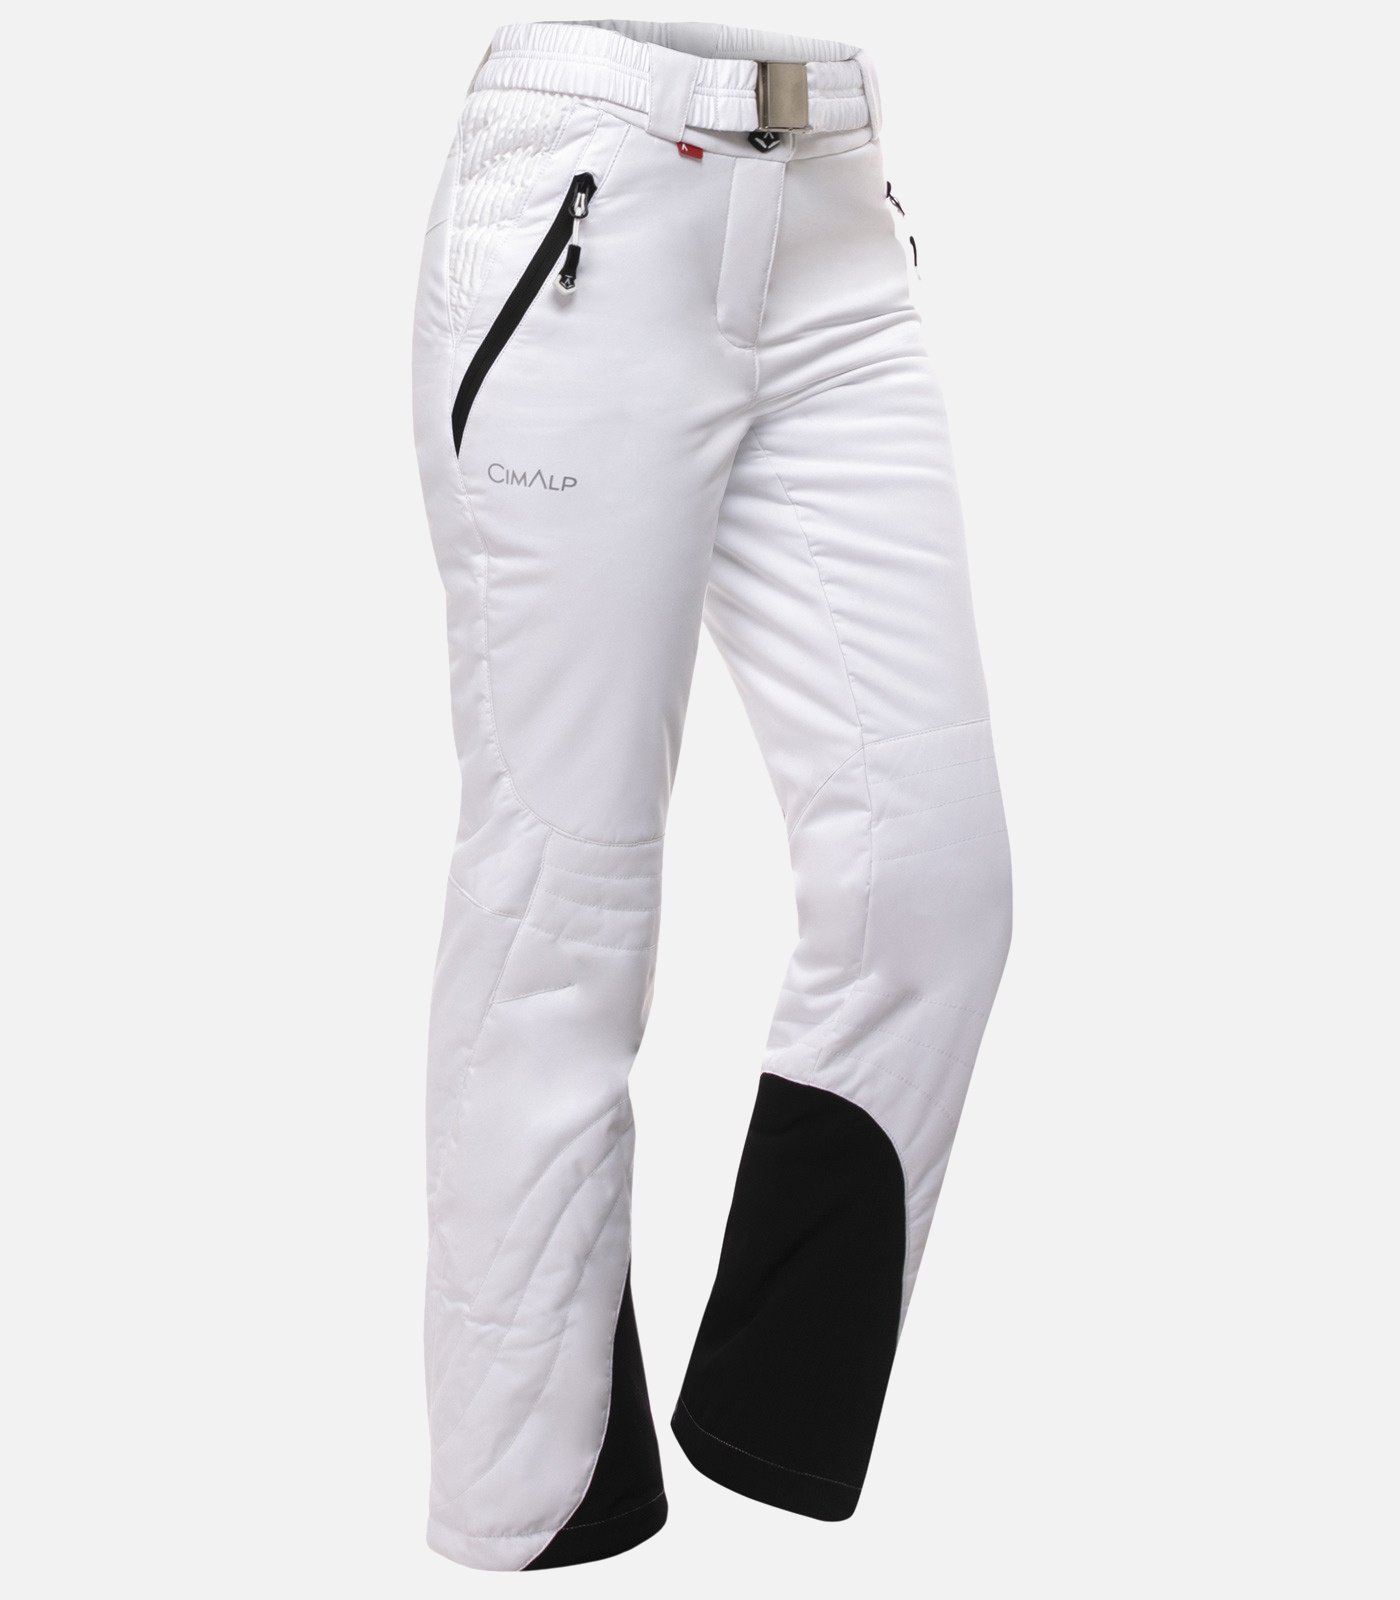 QIULAO Adult Ski Trousers, Men's And Women's Suspenders, Snow Pants,  Waterproof And Windproof Veneer Ski Pants, Warm And Breathable Winter  Sportswear (Color : Gris claro, Size : 2XL) : Amazon.co.uk: Fashion